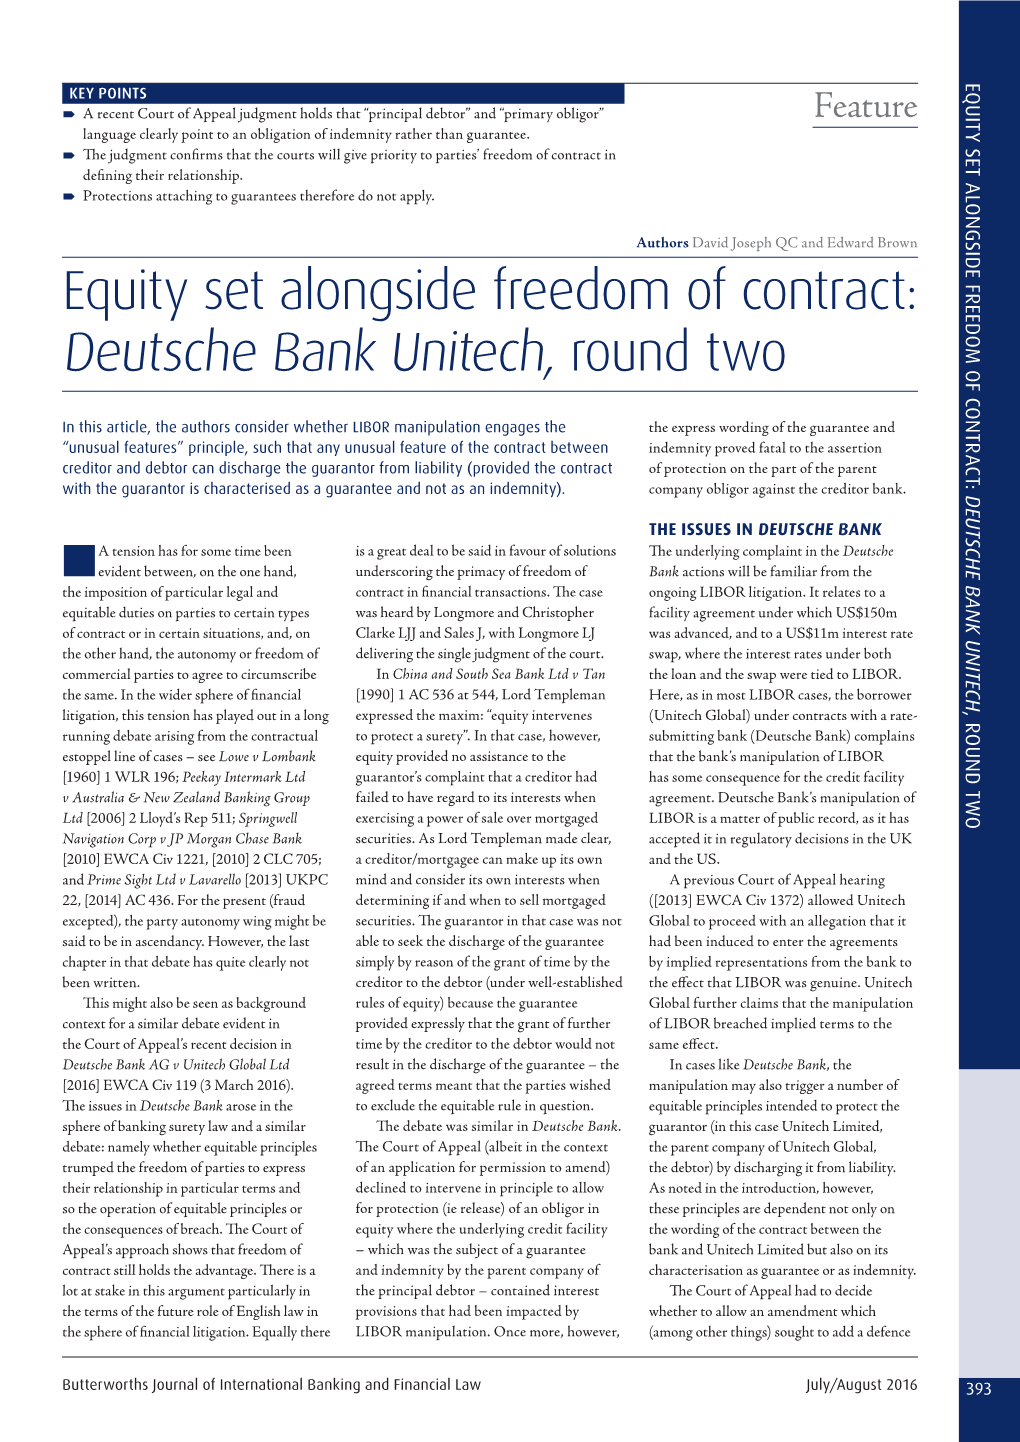 Equity Set Alongside Freedom of Contract: Deutsche Bank Unitech, Round Two